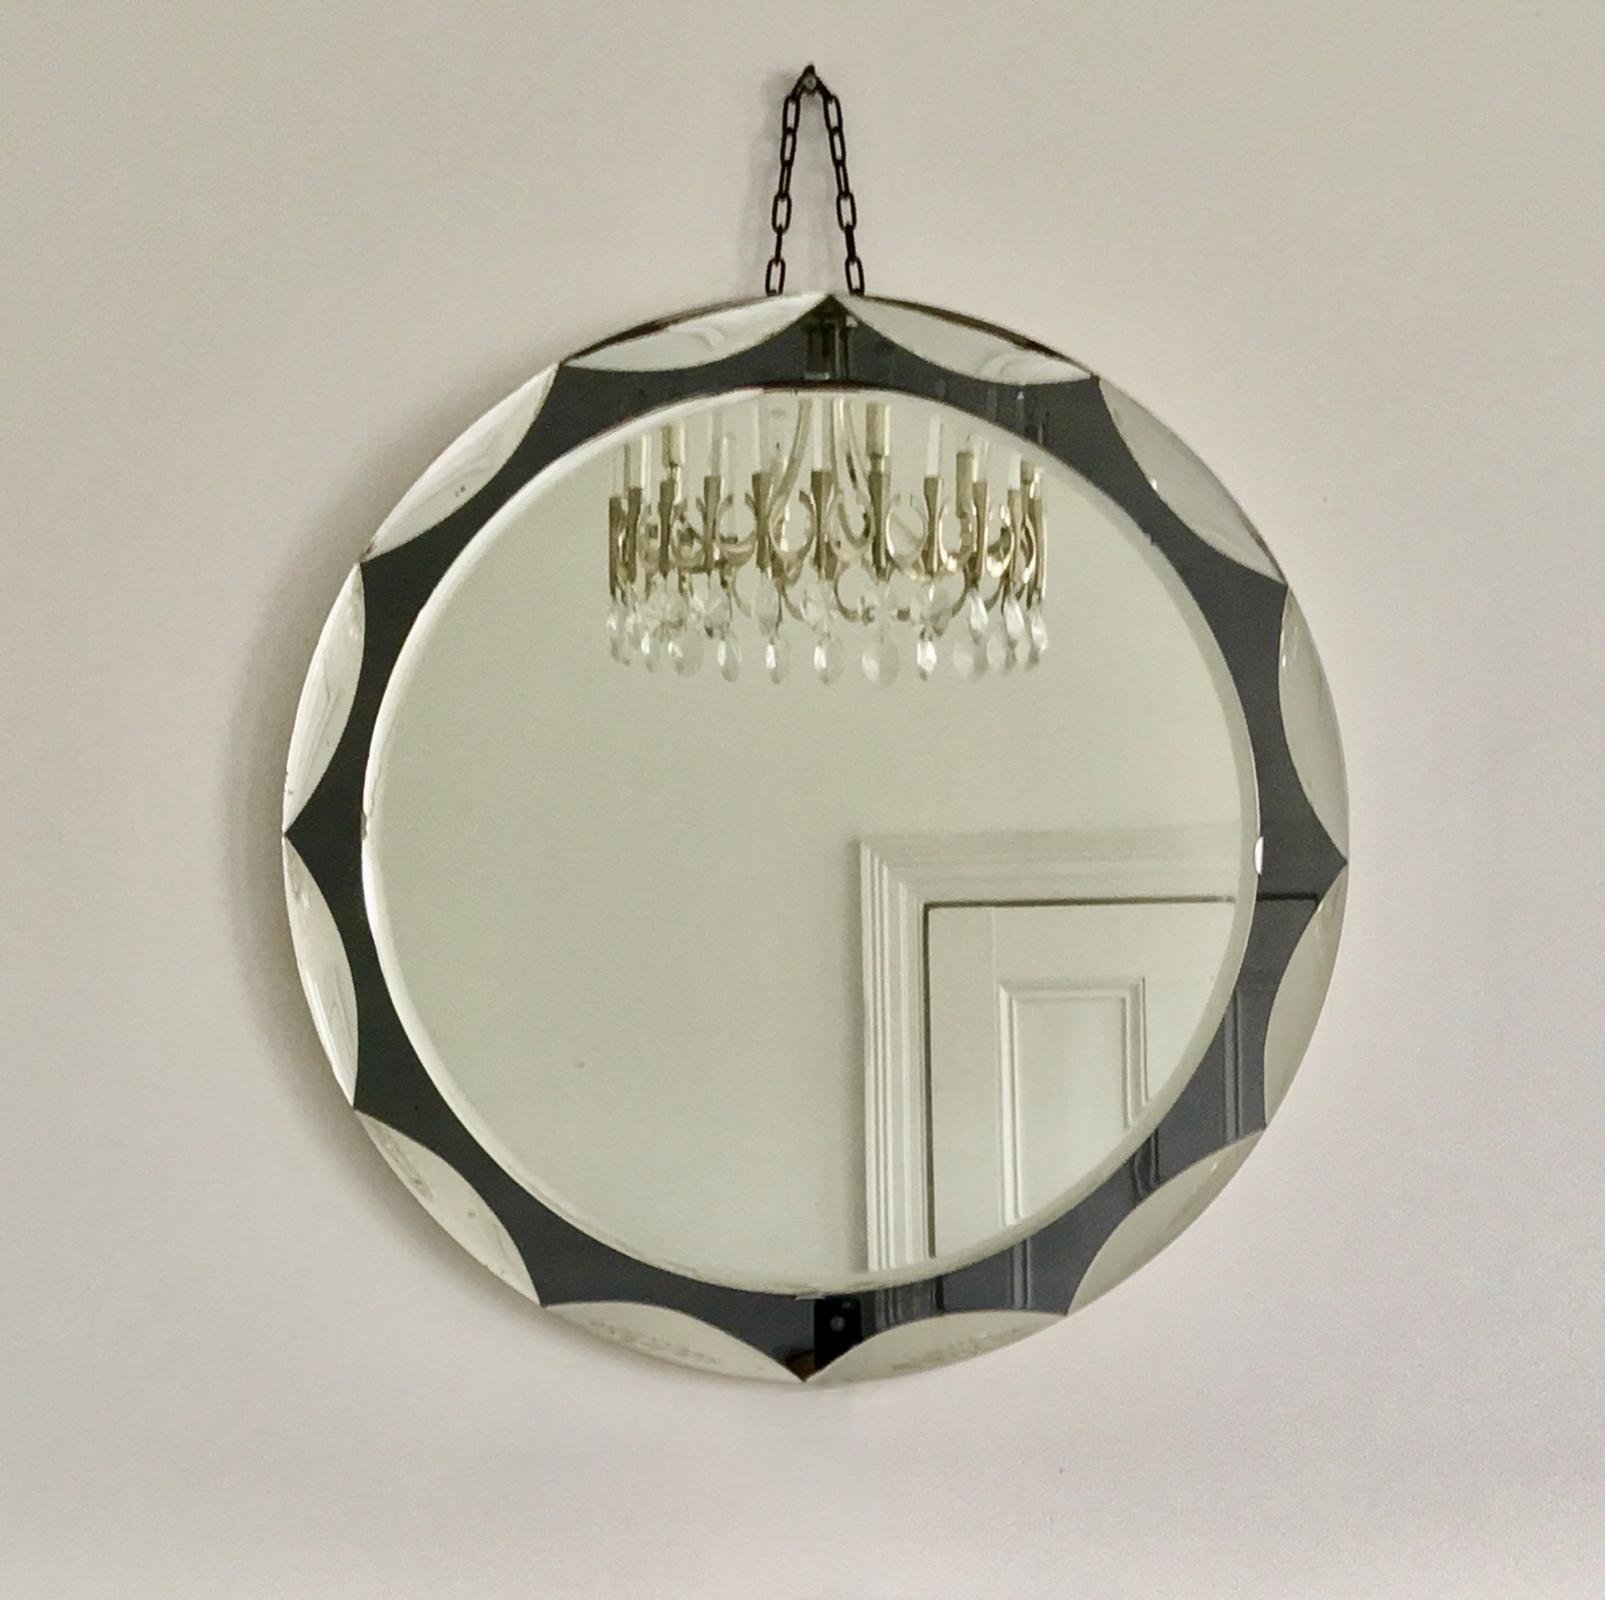 Midcentury circular mirror with large scalloped black glass edge detail. Metalvetro Galvorame of Siena, 1960s, Italy.

The mirror is a high-quality piece, of good size, with a double layer of mirror glass. The central glass is clear, with a beveled